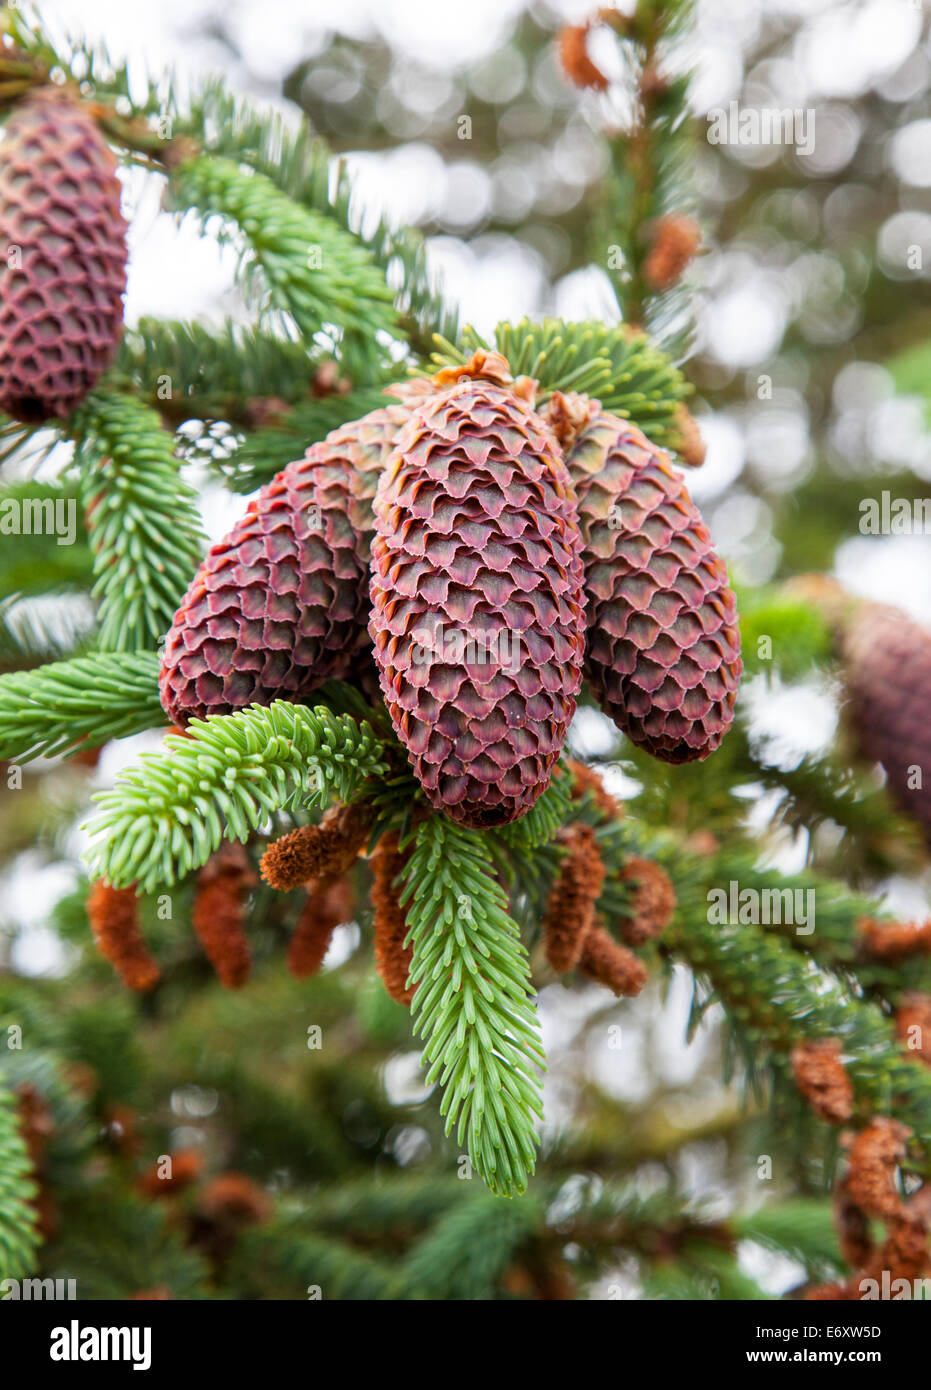 Pine cones from a Picea Likiangensis tree from China Stock Photo